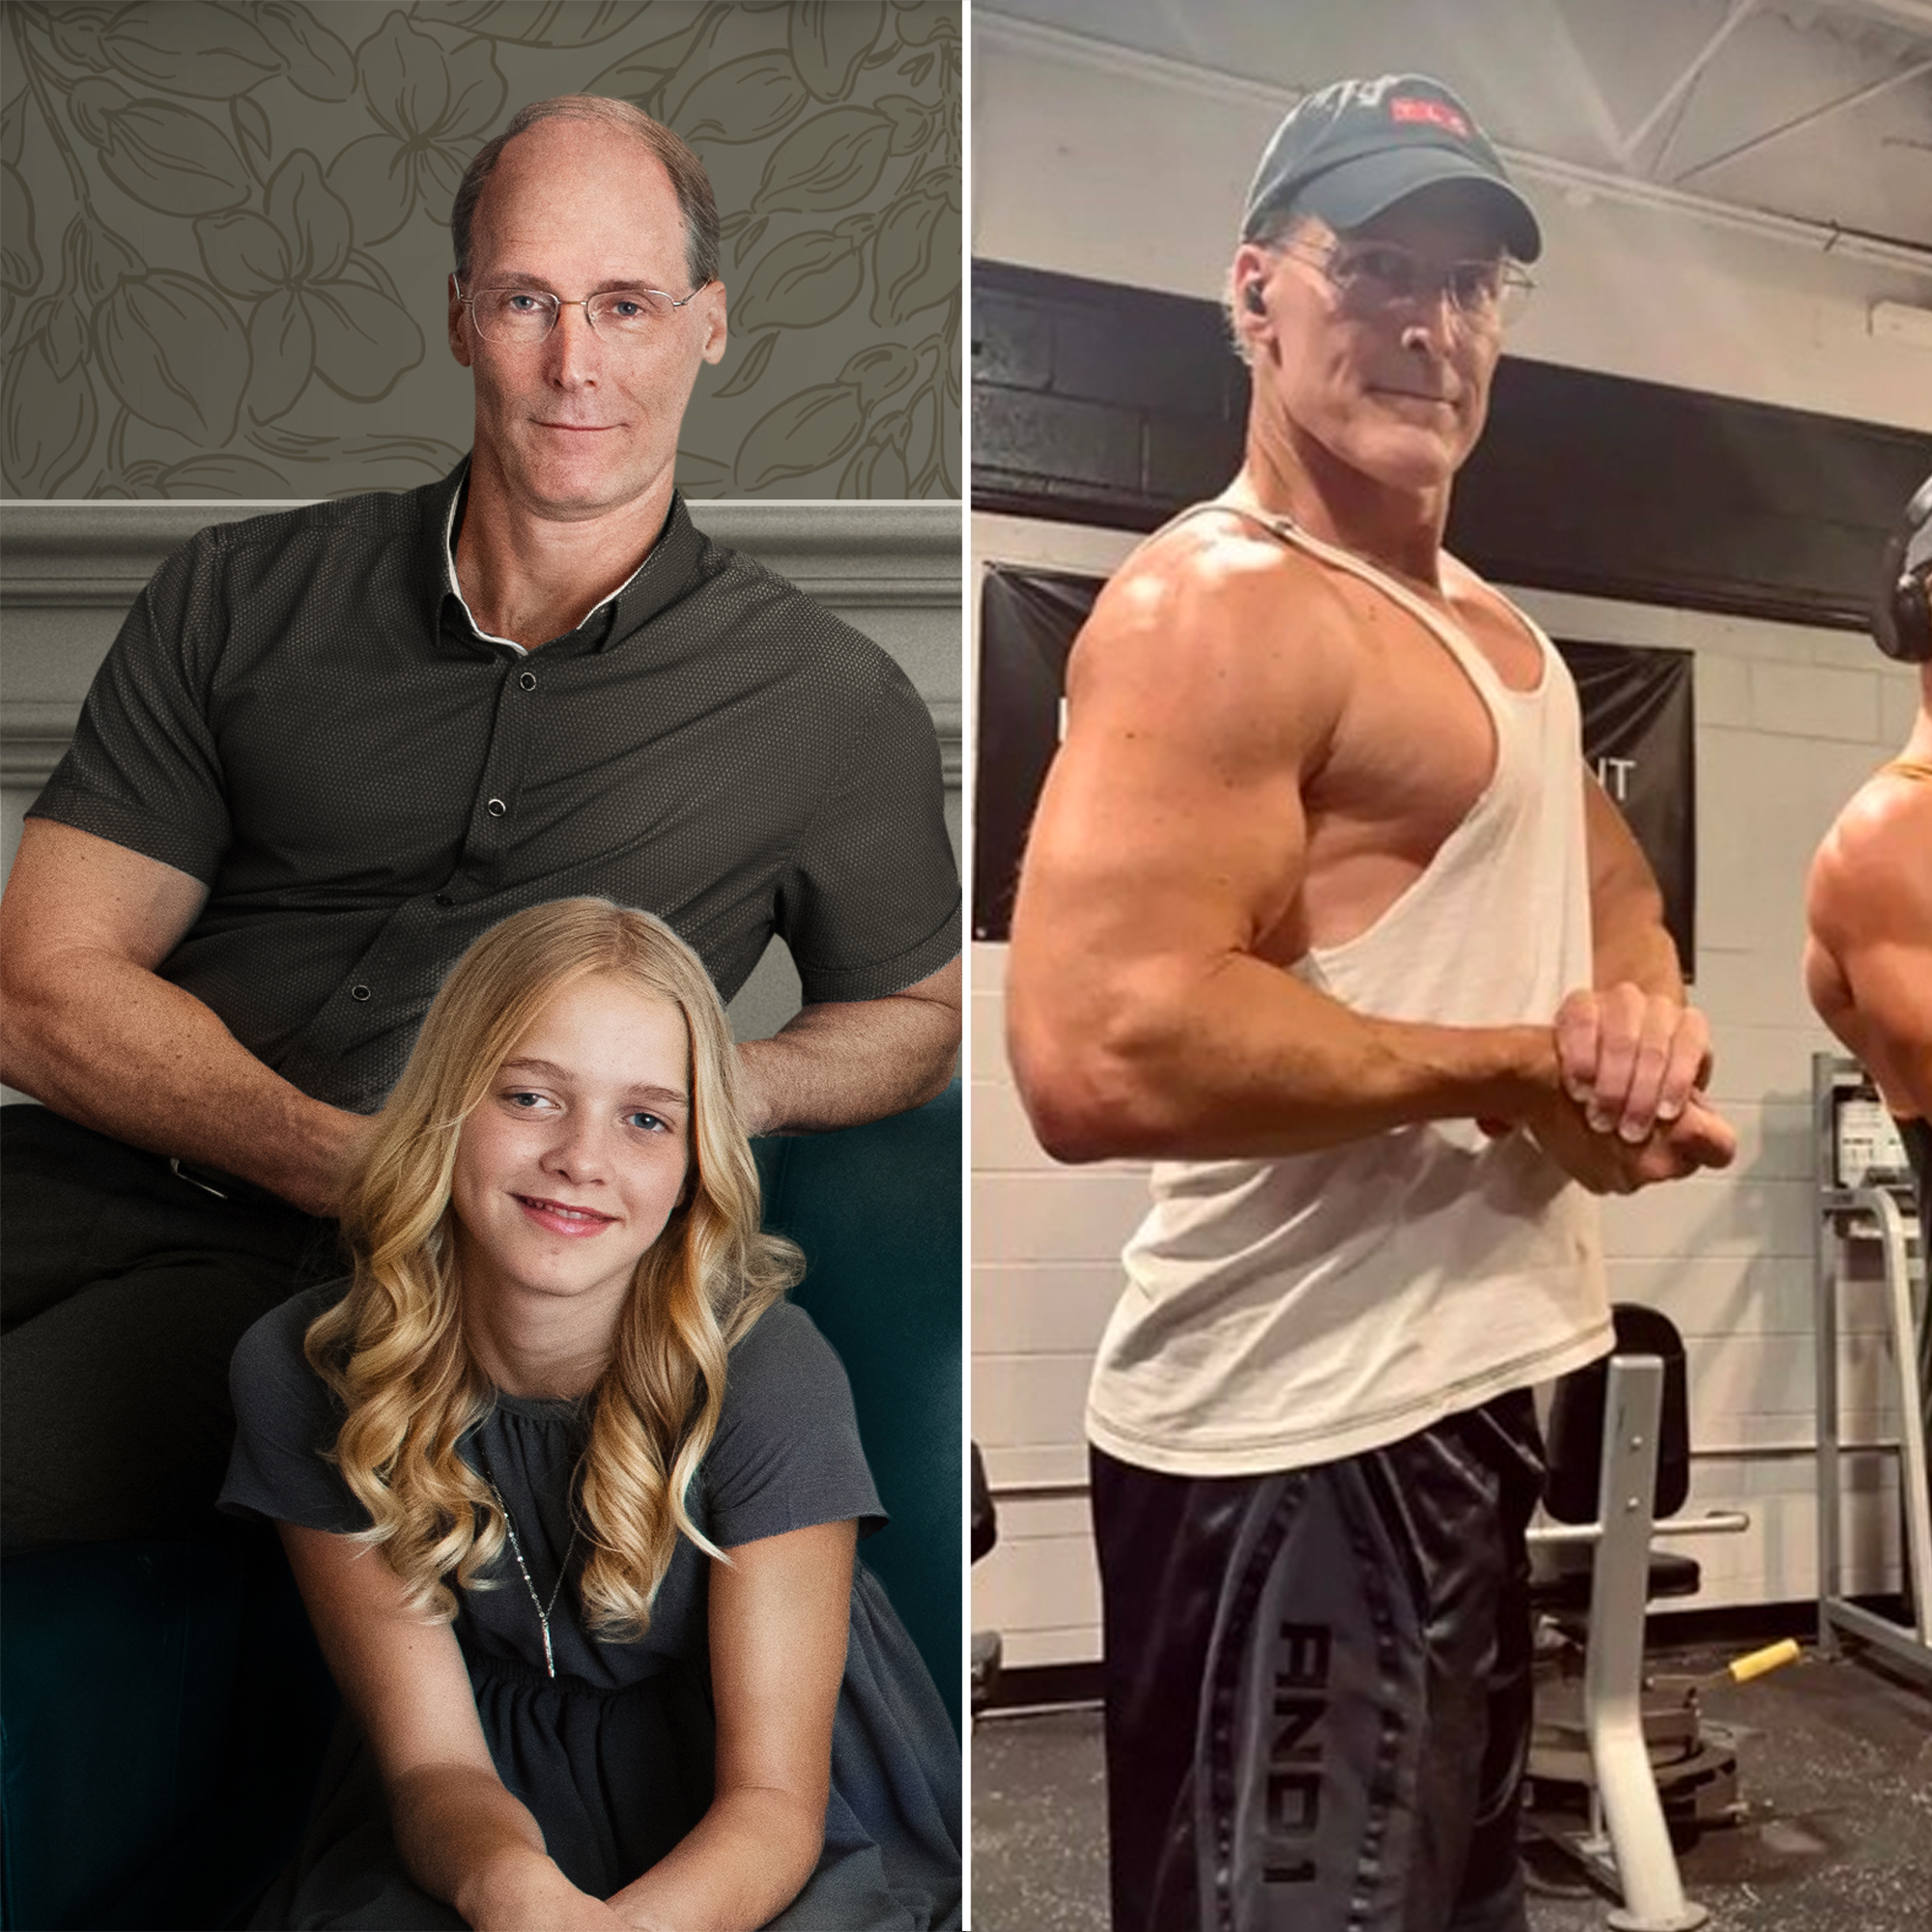 Before and after photos on Instagram show how lifting weights is